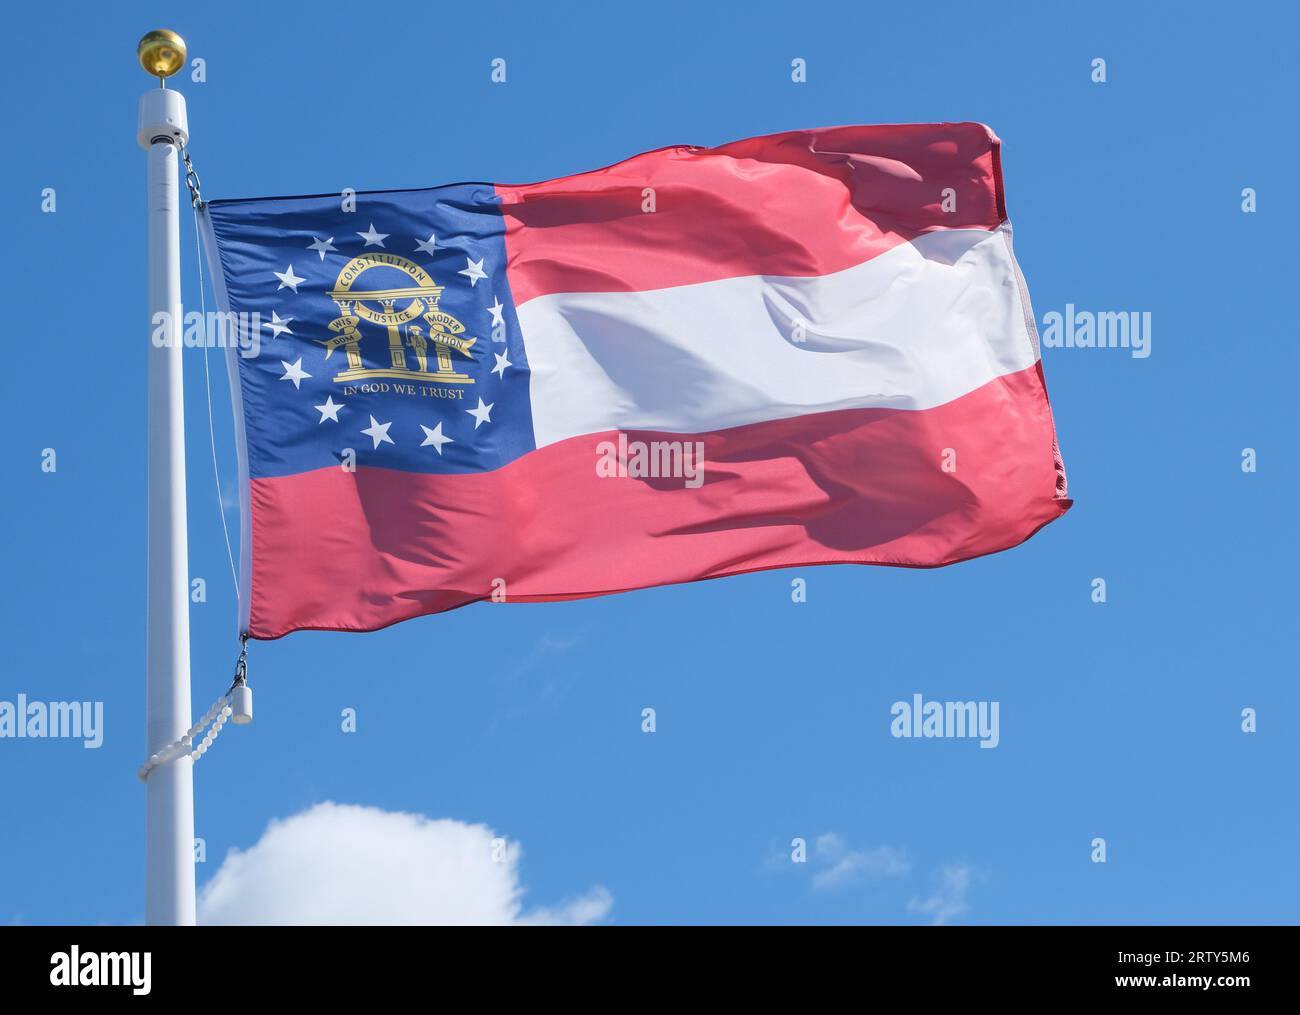 Close up photo of Georgia state flag against a blue sky background Stock Photo